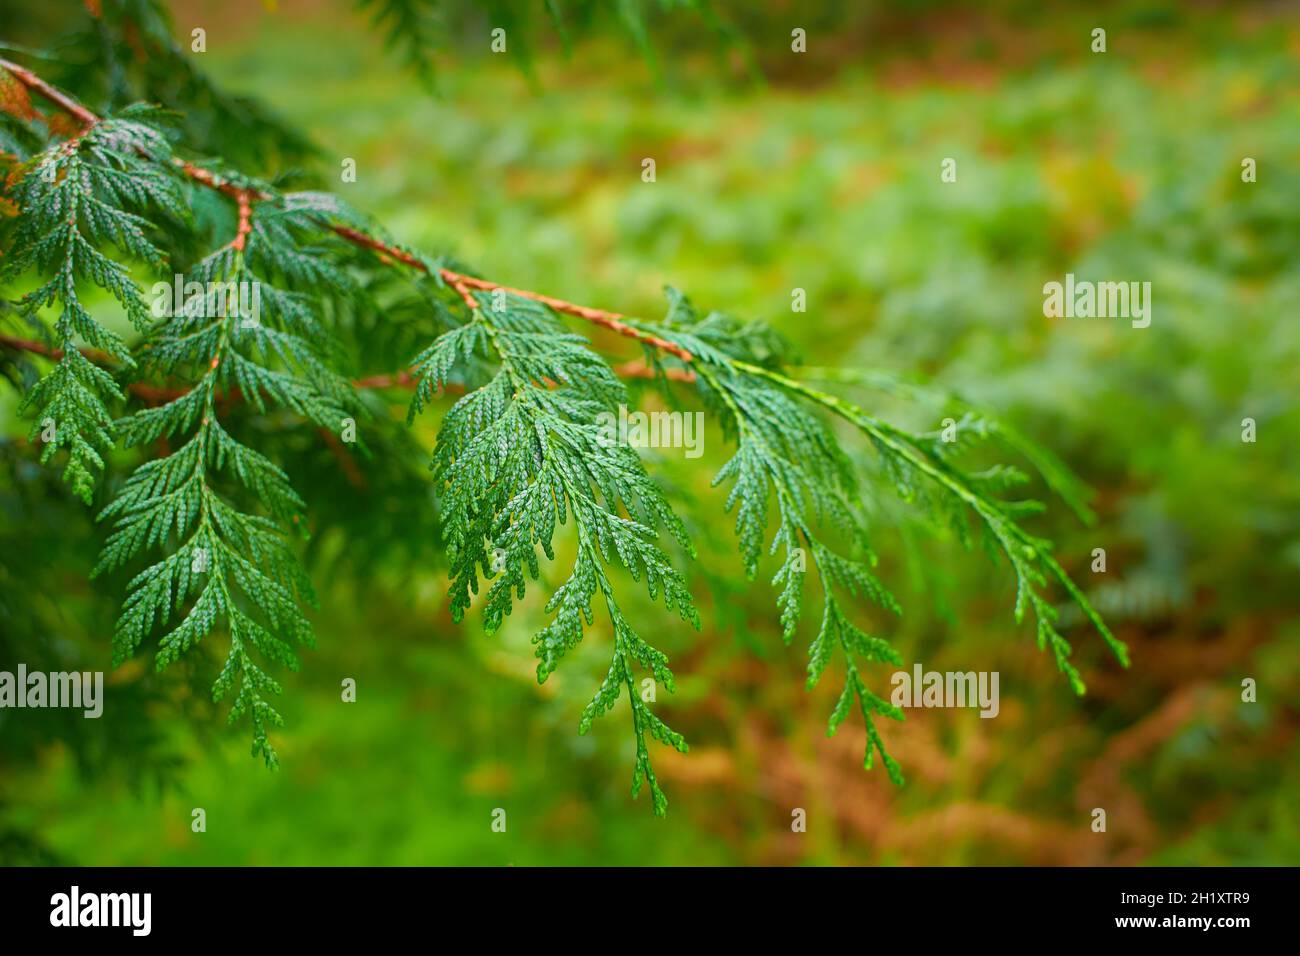 Close up view of cypress pine green leaves for Christmas or winter festive season. (Selective focus) Stock Photo